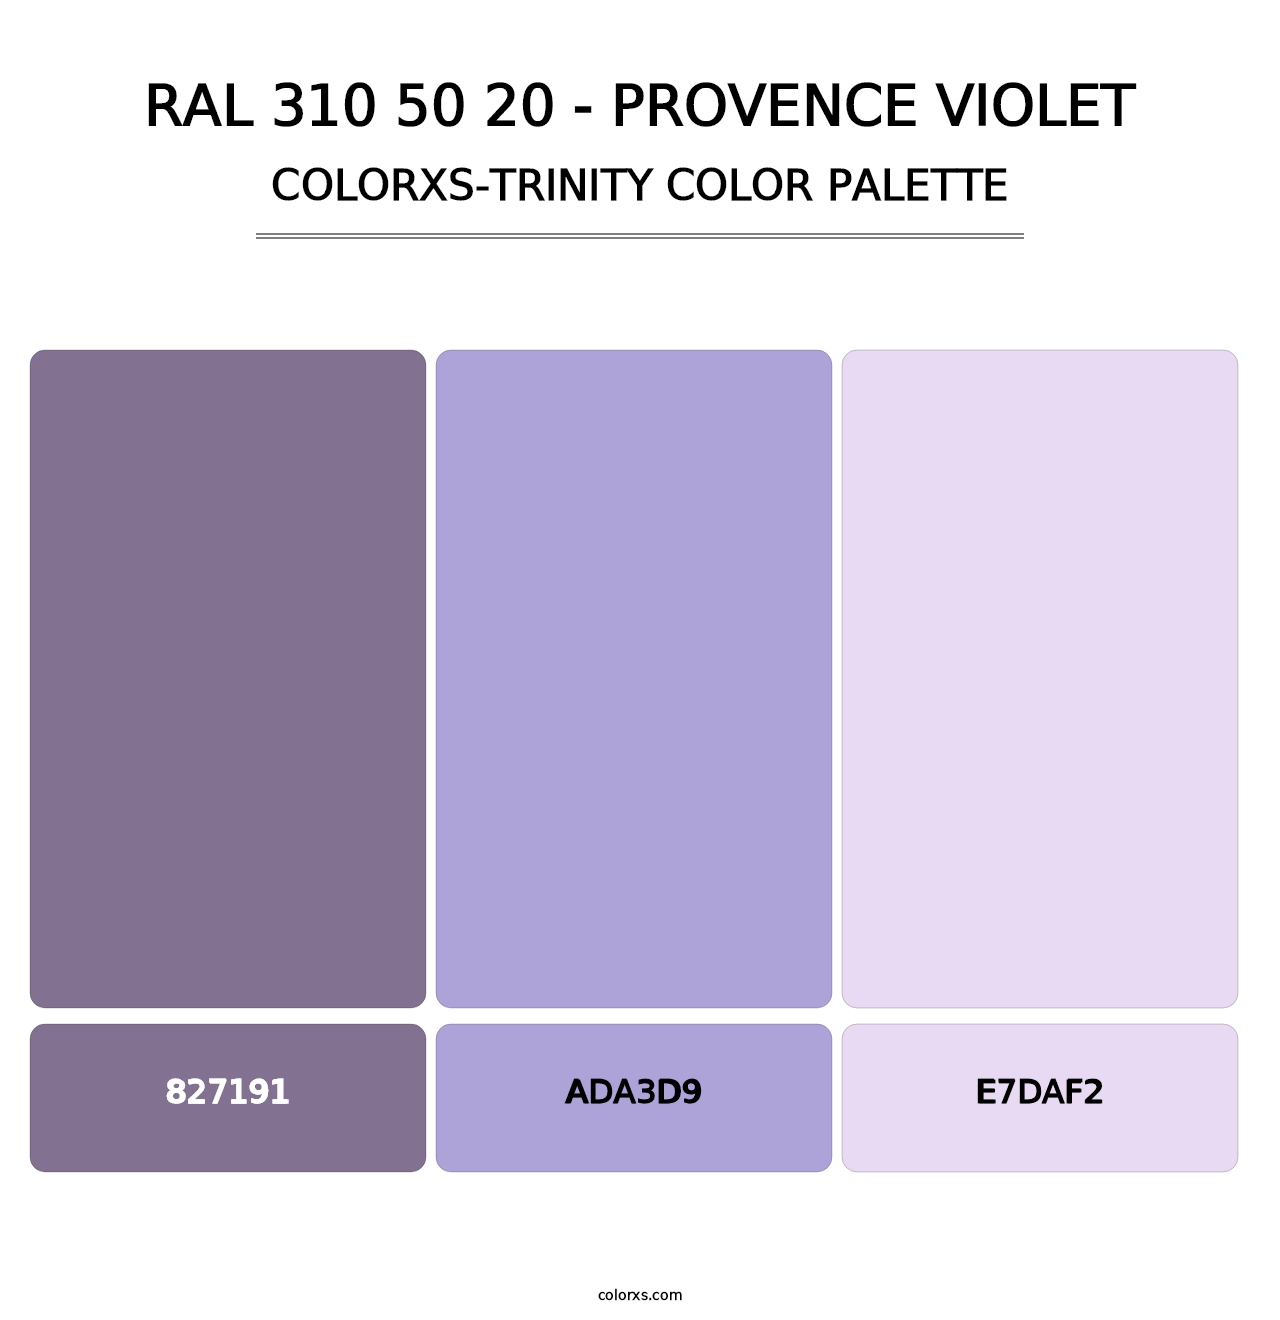 RAL 310 50 20 - Provence Violet - Colorxs Trinity Palette